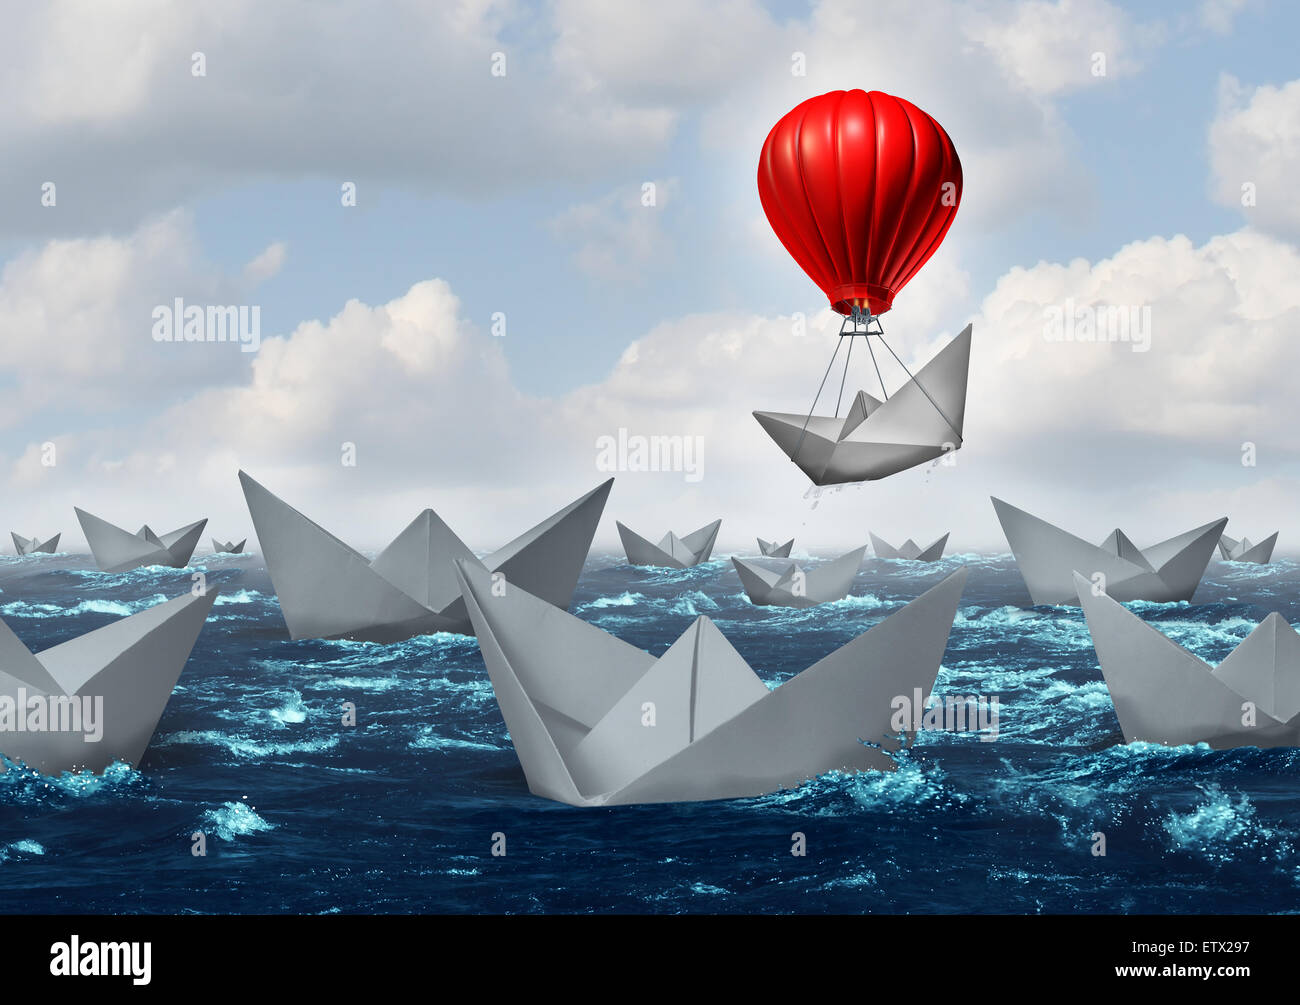 Business advantage concept and game changer symbol as an ocean with a crowd of paper boats and one boat rises above the rest with the help of a red hot air balloon as a success and innovation metaphor for new thinking. Stock Photo